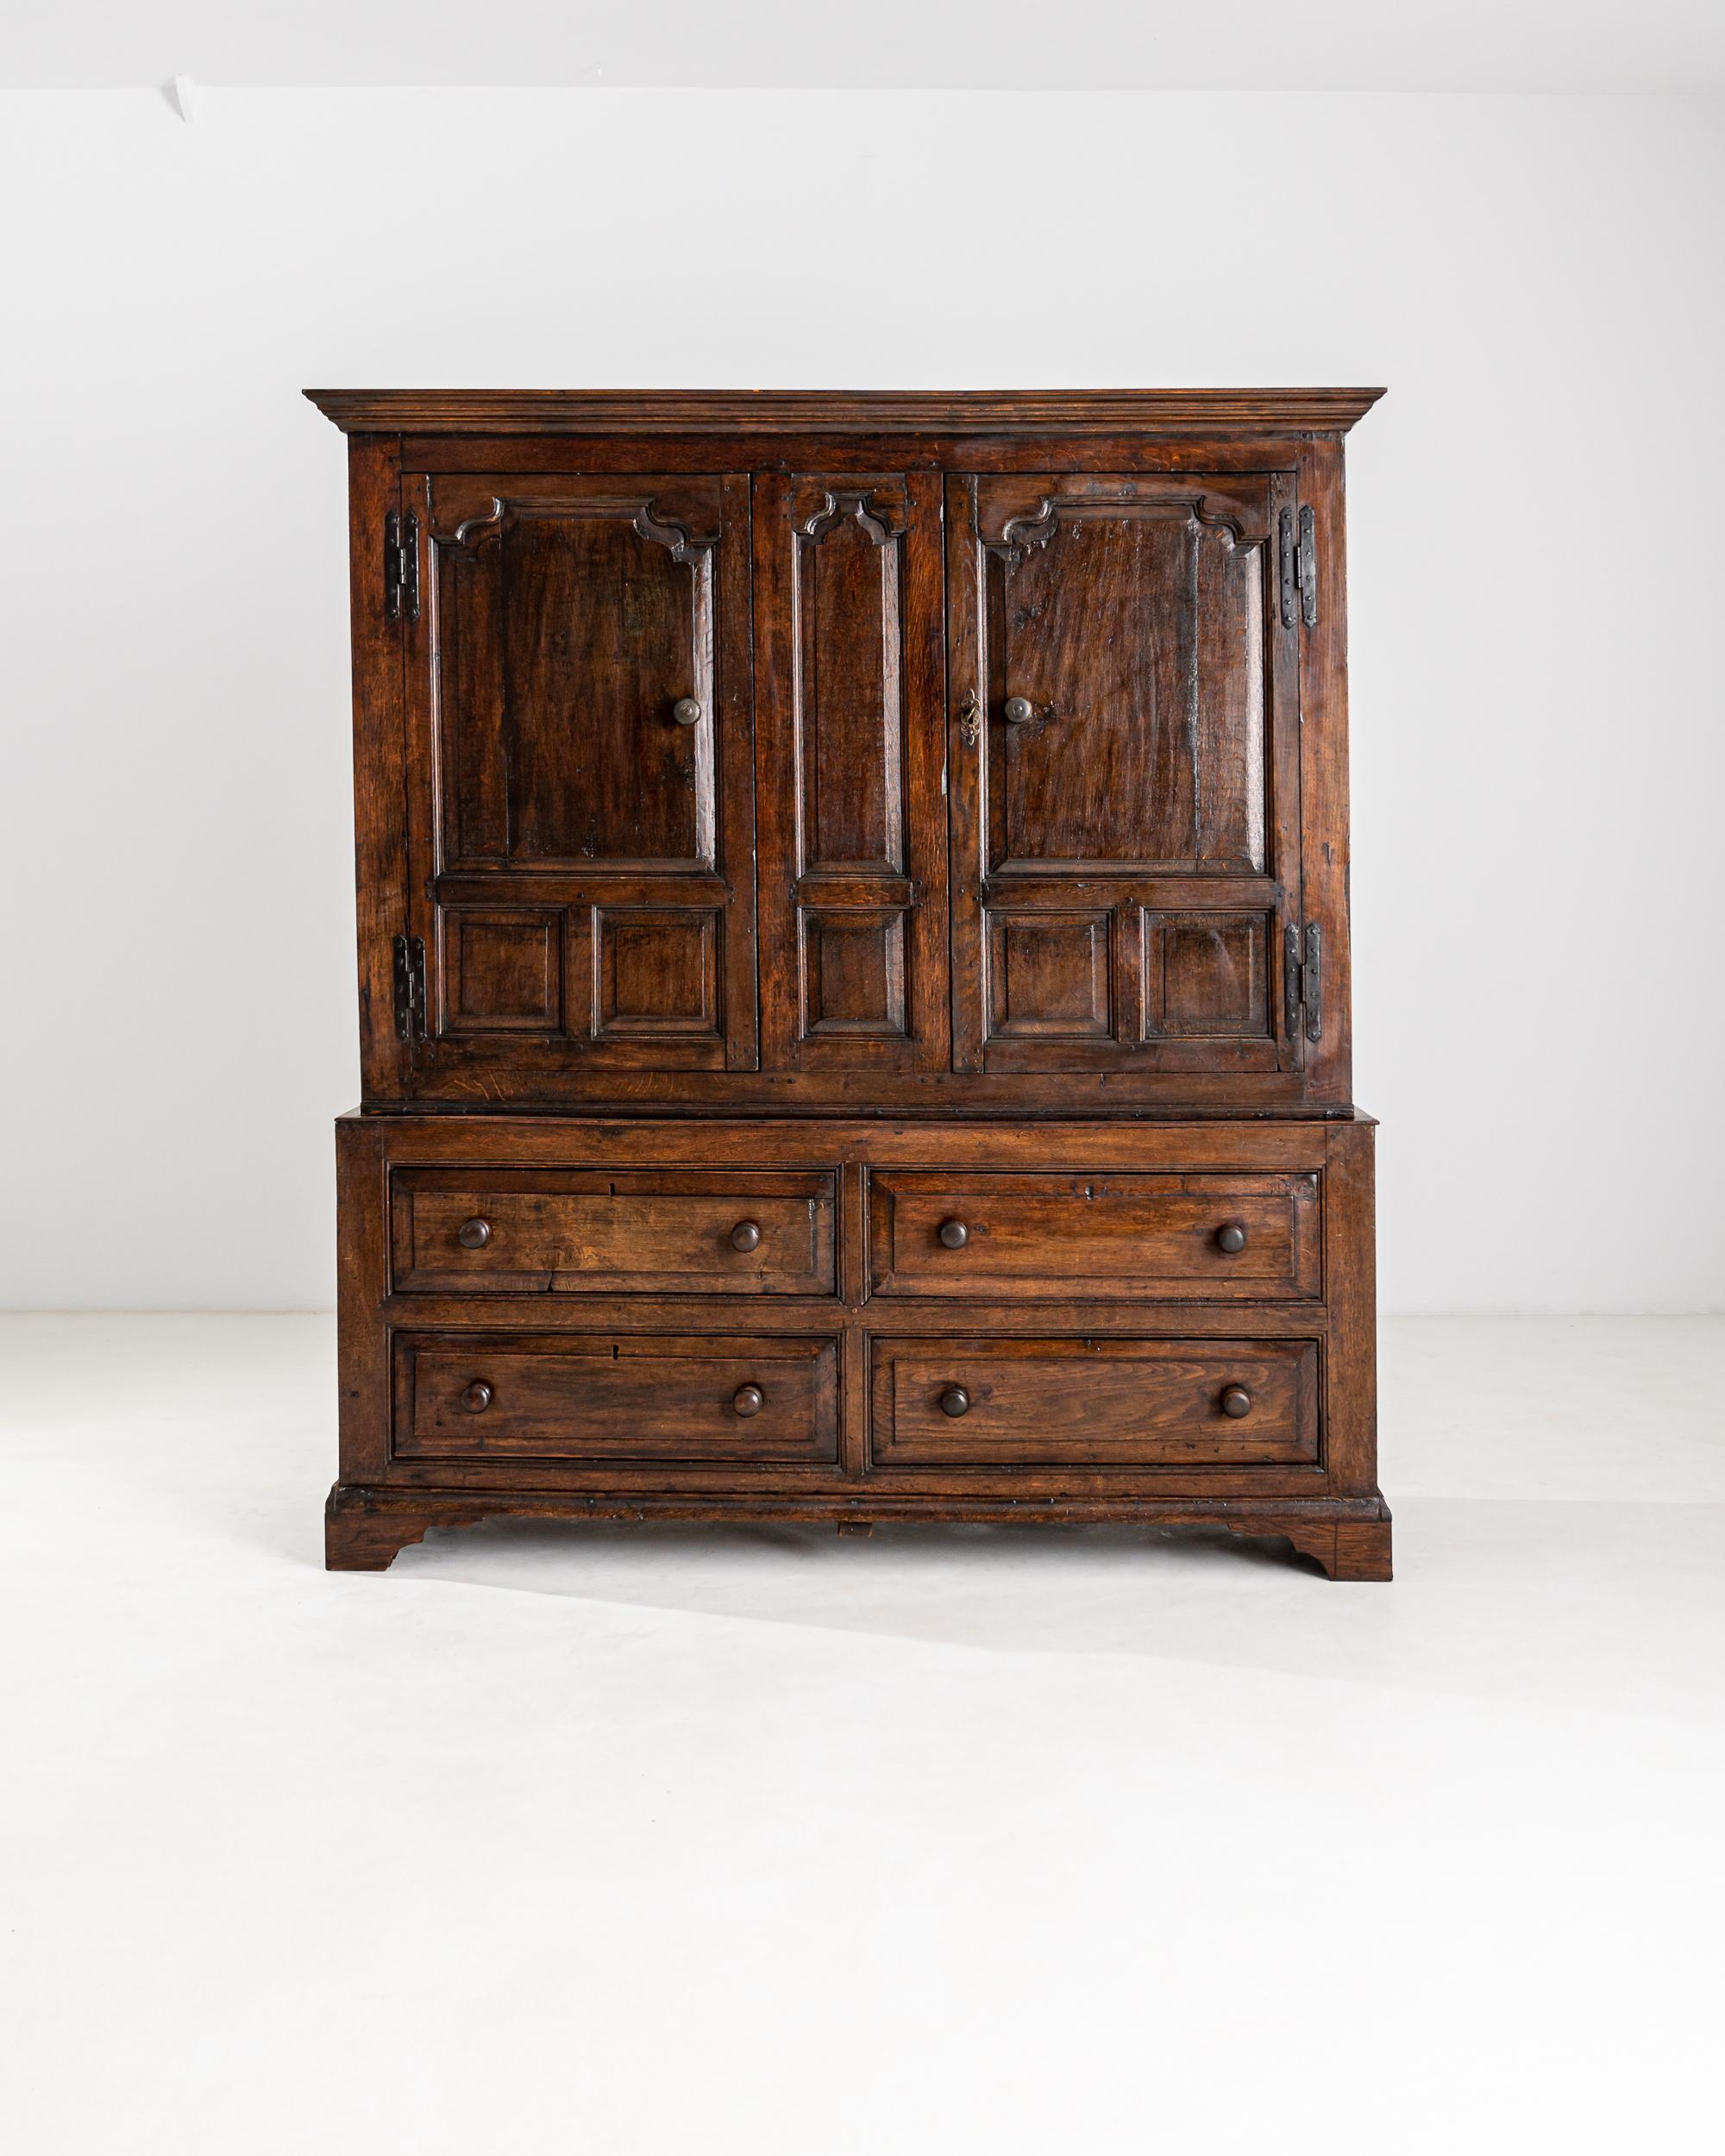 A 19th century wooden cabinet produced in the United Kingdom, flaunting an opulent auburn finish and a luscious natural patina. The lower case is fitted with four elegant and practical front drawers, adorned by rounded wooden knobs and topped by an